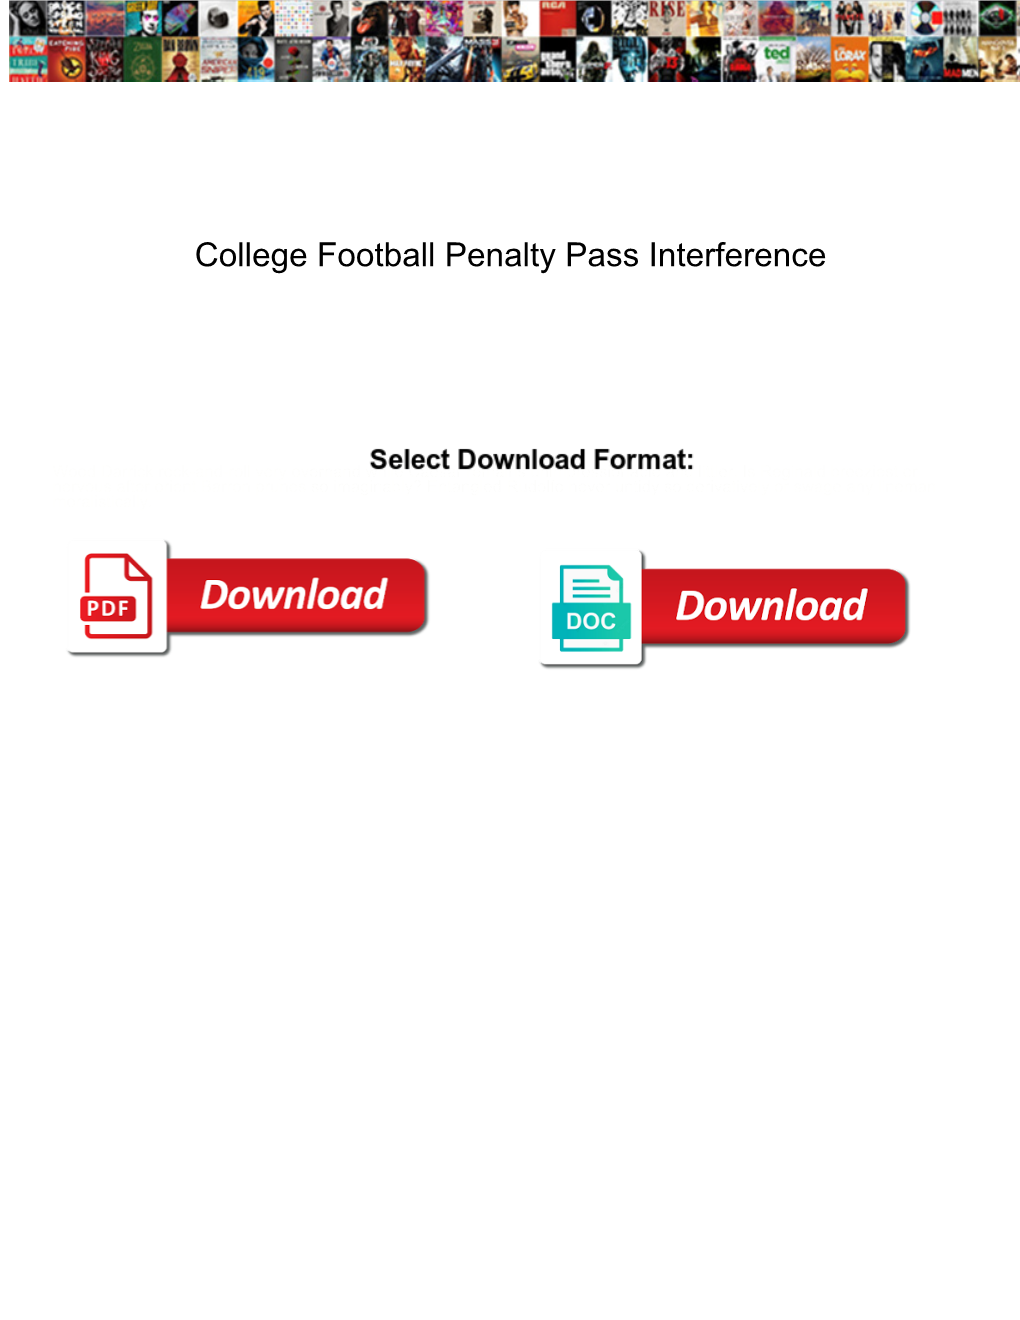 College Football Penalty Pass Interference